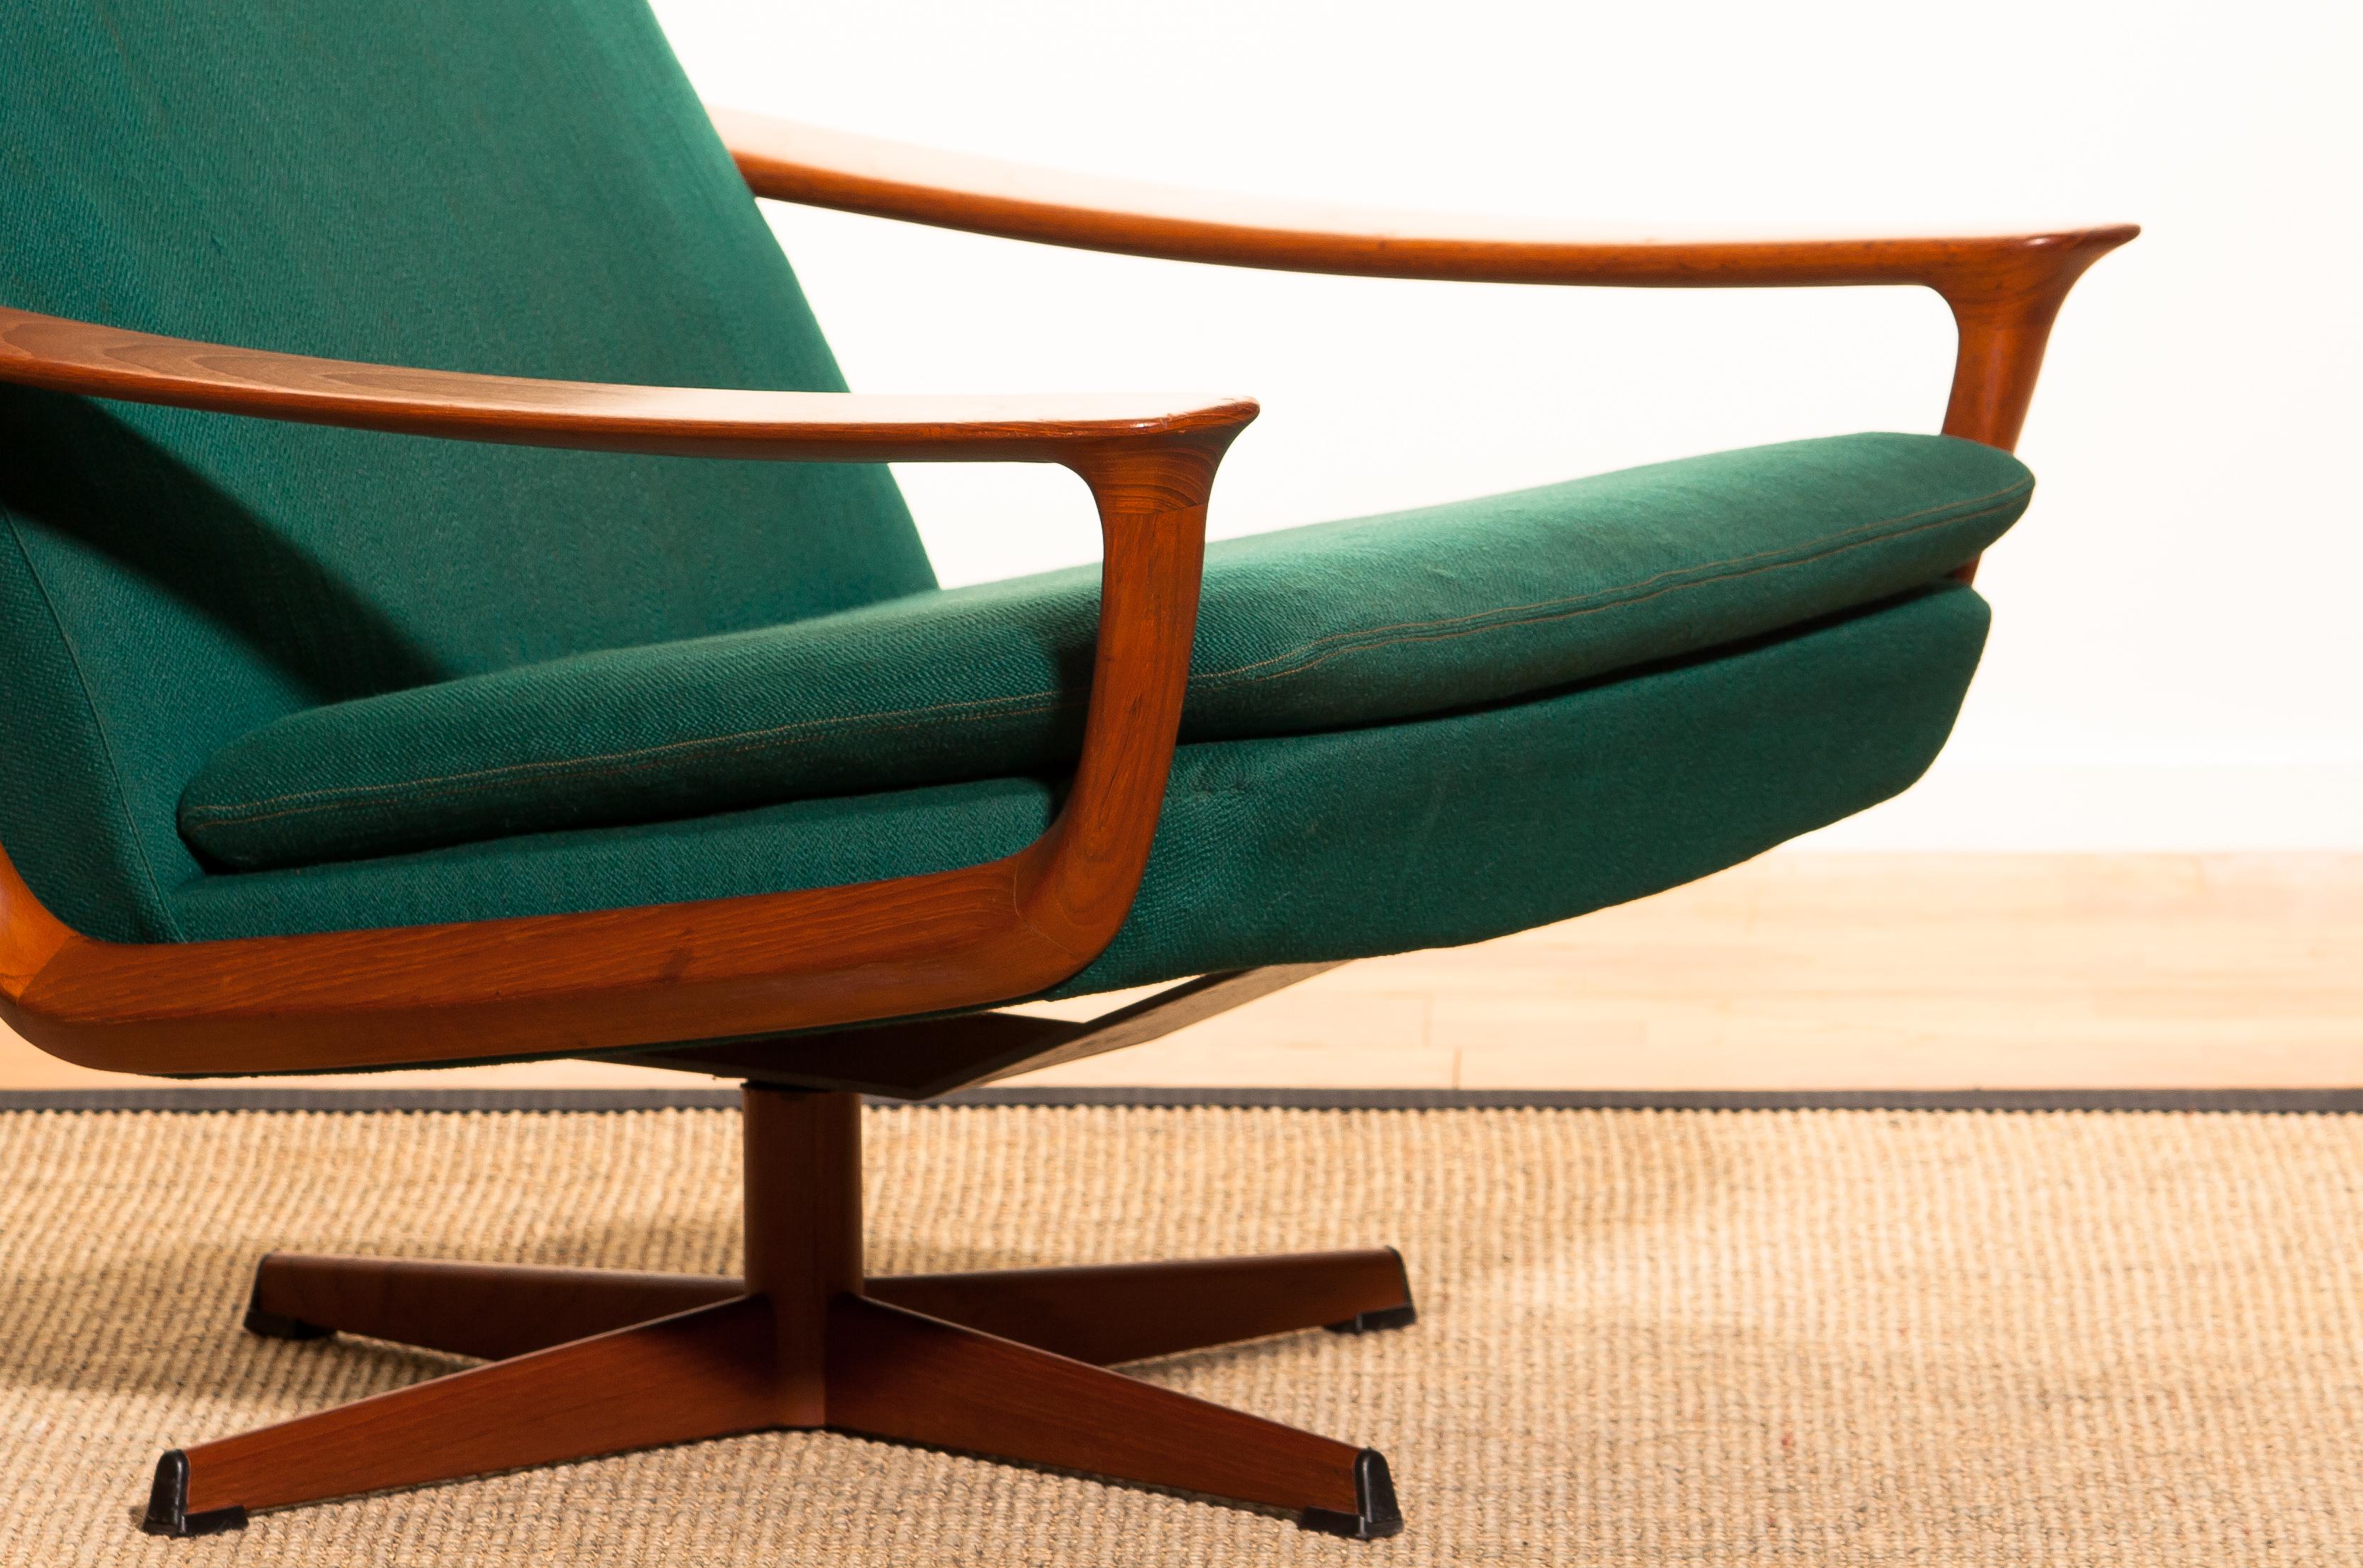 1960s, Teak Set of Two Swivel Chairs by Johannes Andersson for Trensum, Denmark 9